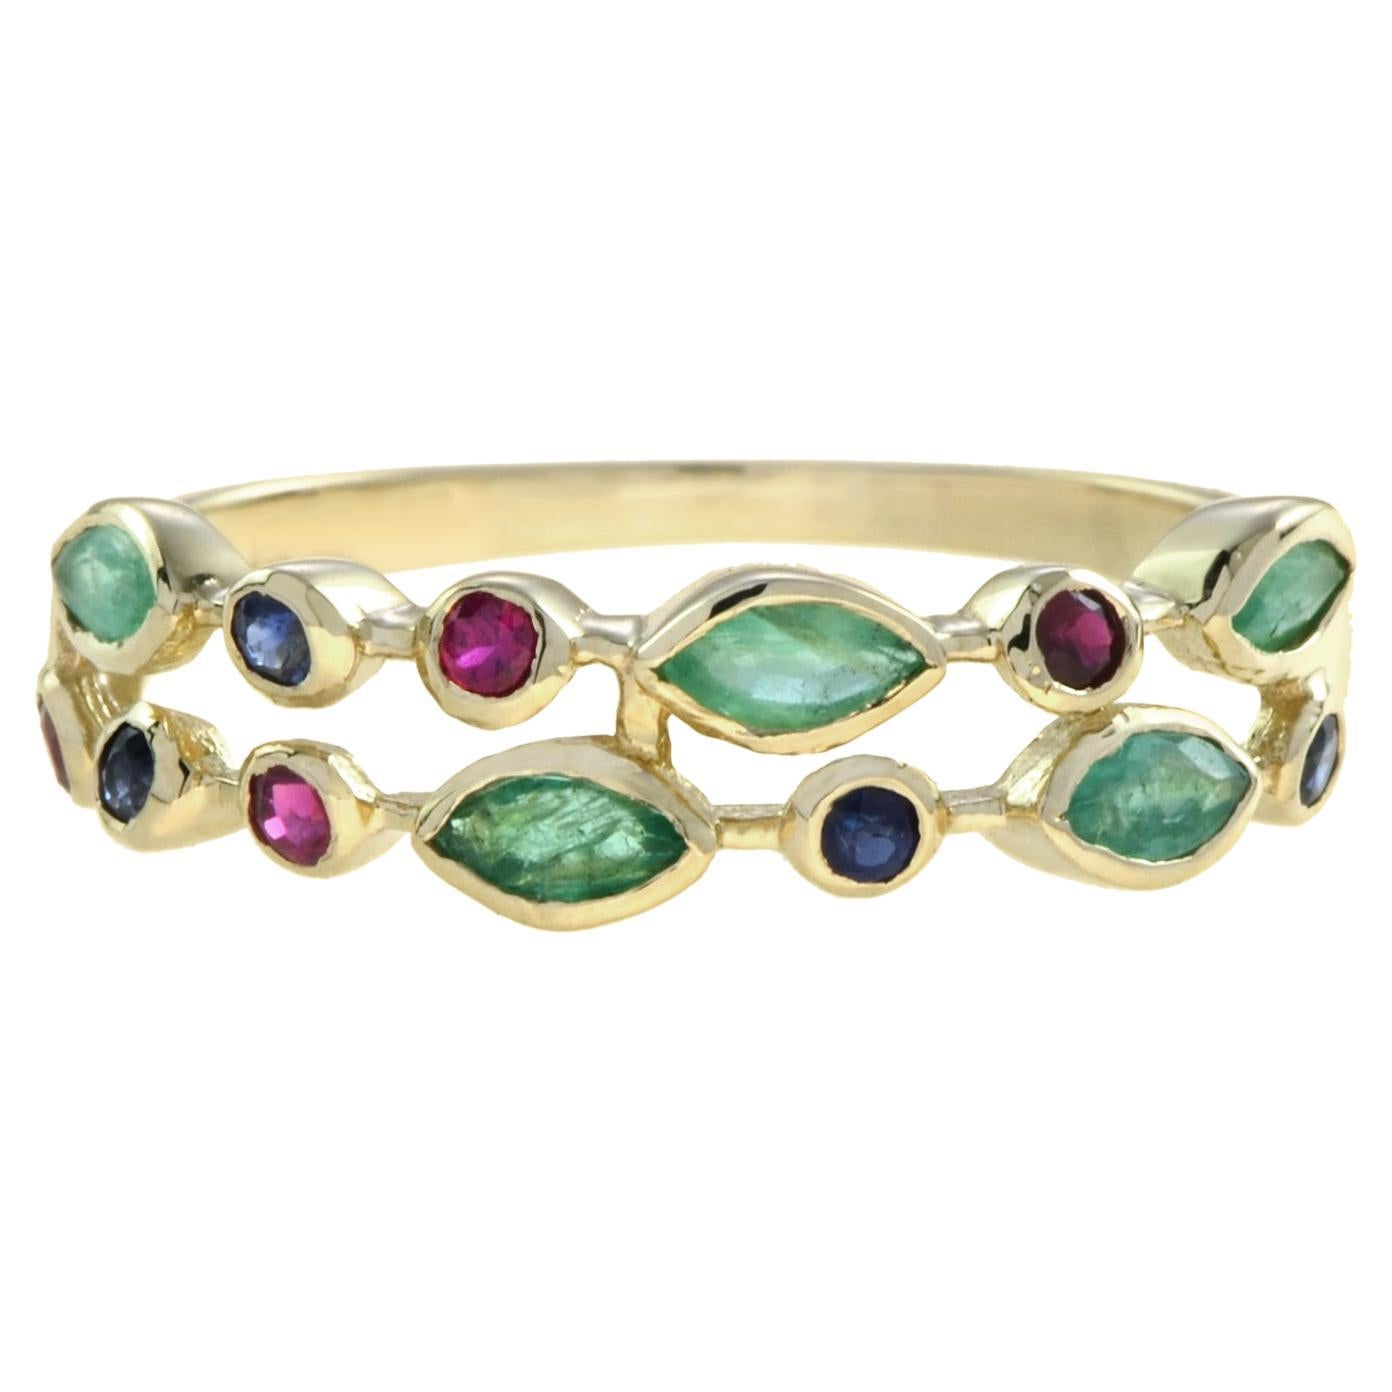 For Sale:  Double Row Emerald, Ruby and Sapphire Eternity Ring in 14K Yellow Gold